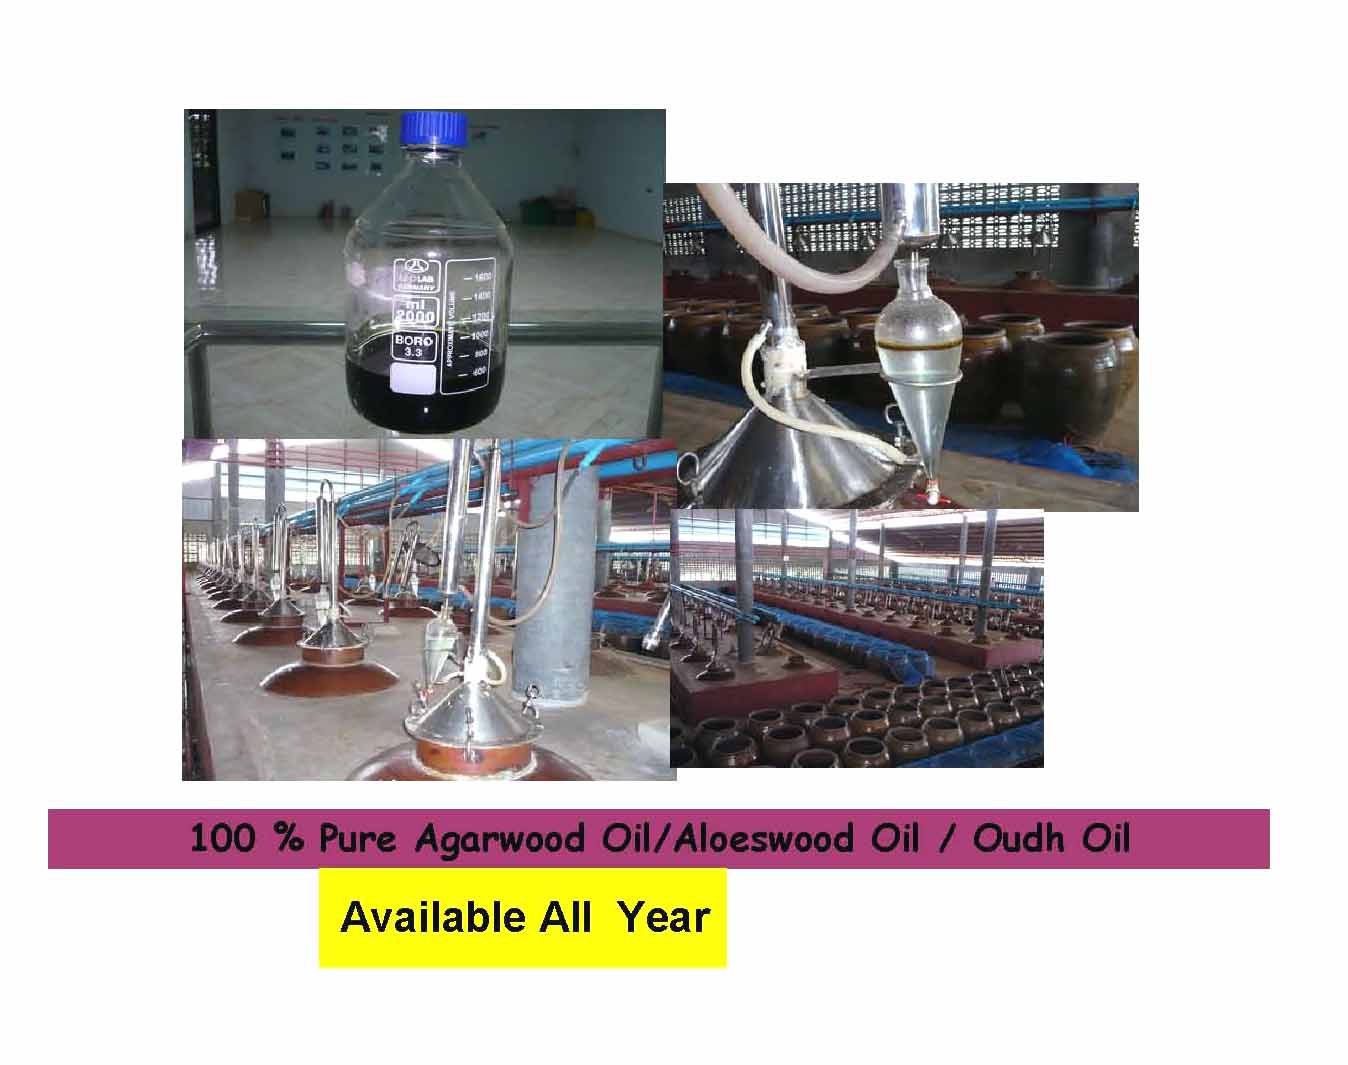 Quality 100% Pure Absolute Agarwood oil with DARK BROWN color